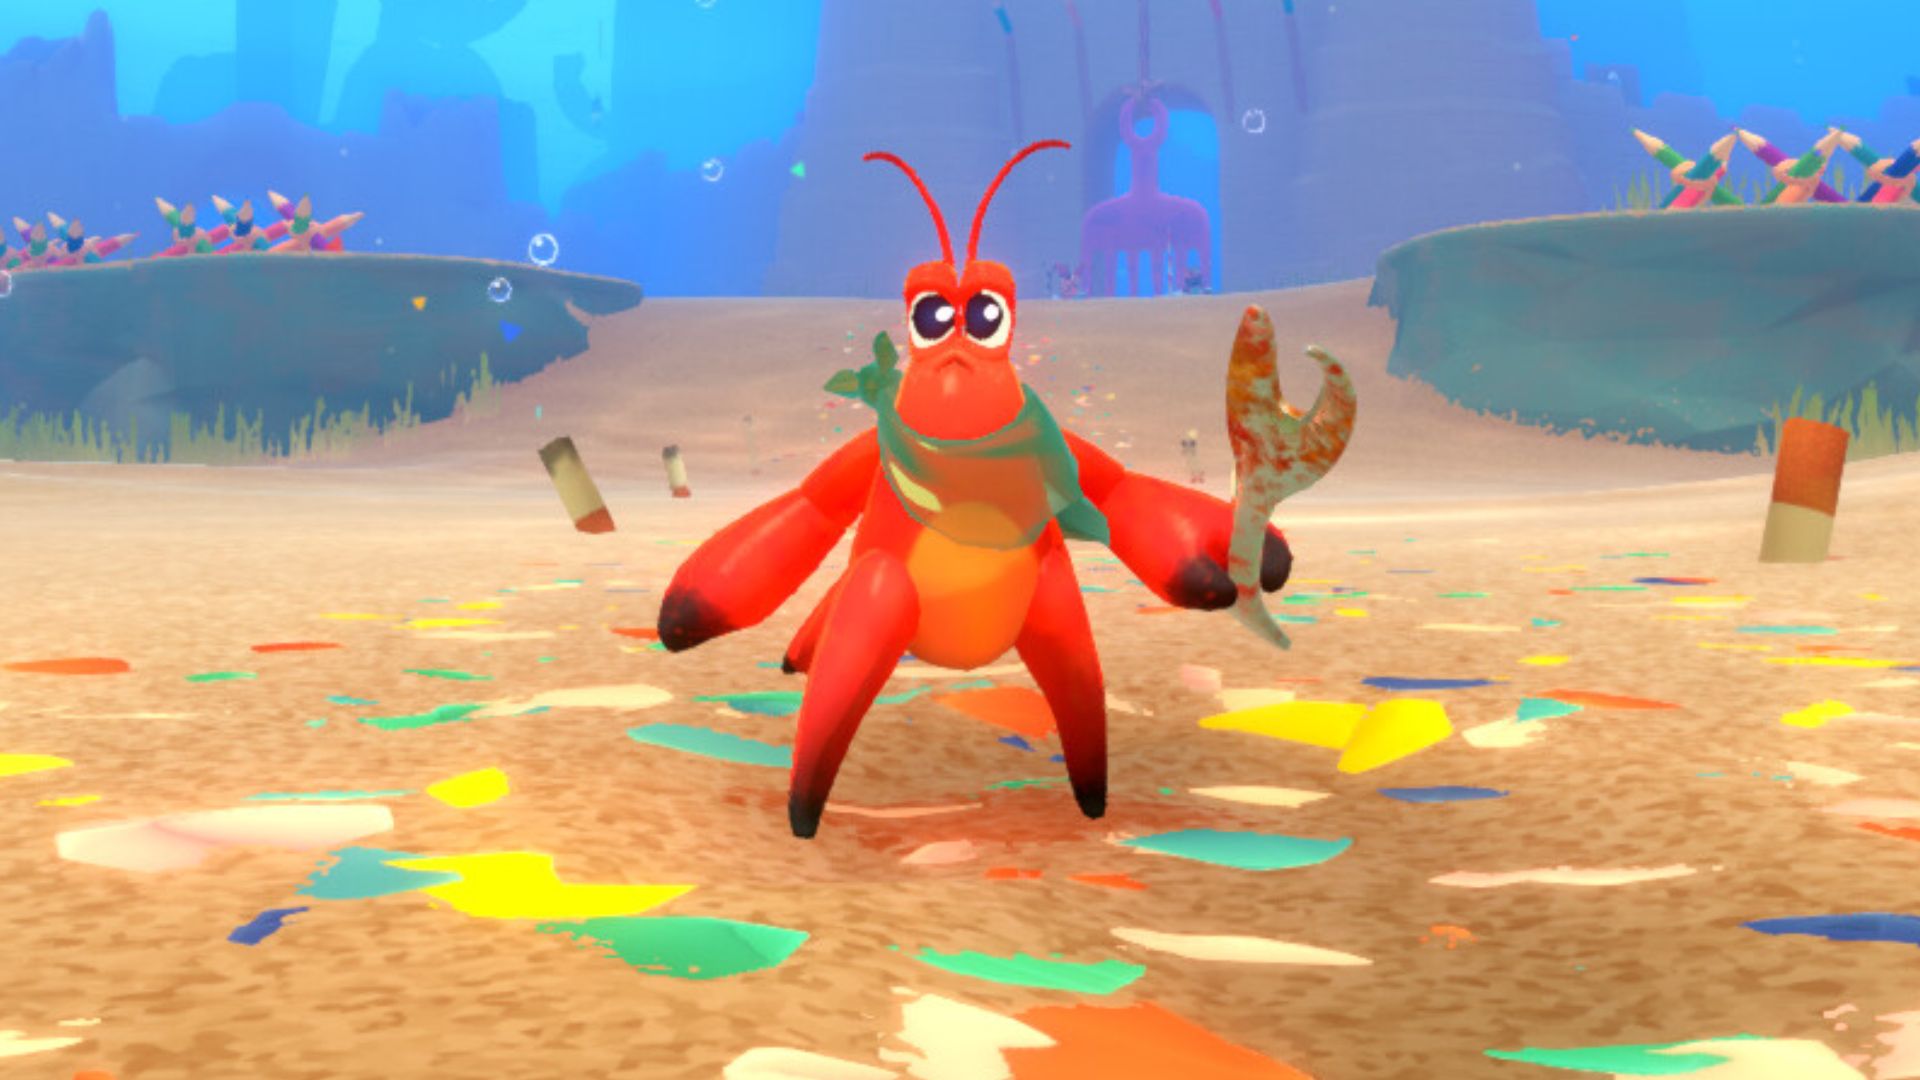 You can play as a garbage-loving crab in this new soulslike indie game